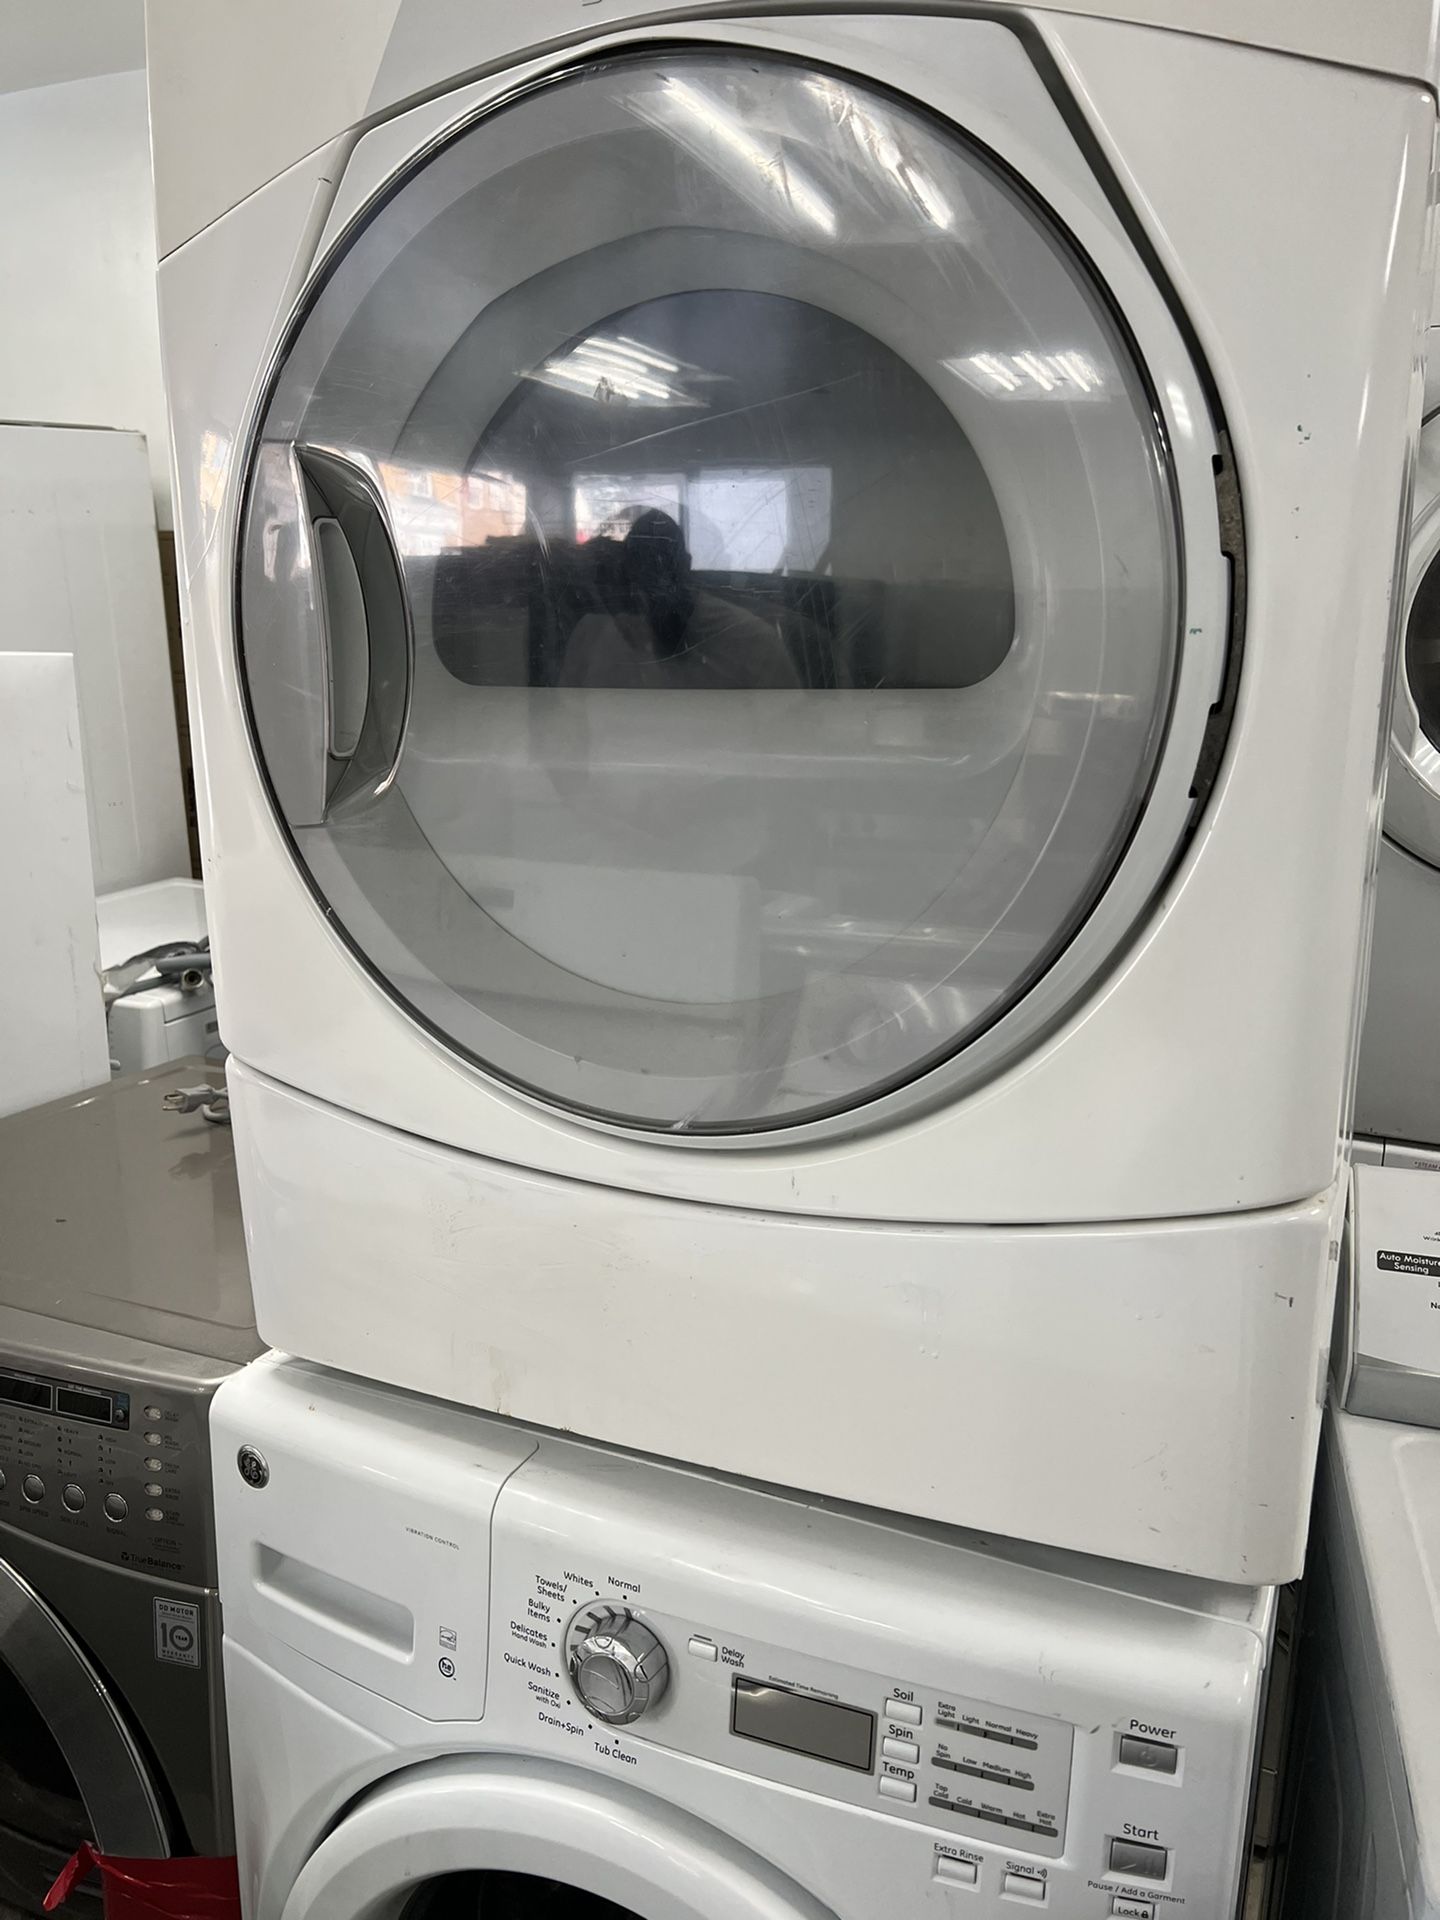 Washer machine Frigidaire And Electric Dryer Whirlpool in great Condition (3 months Guaranteed )